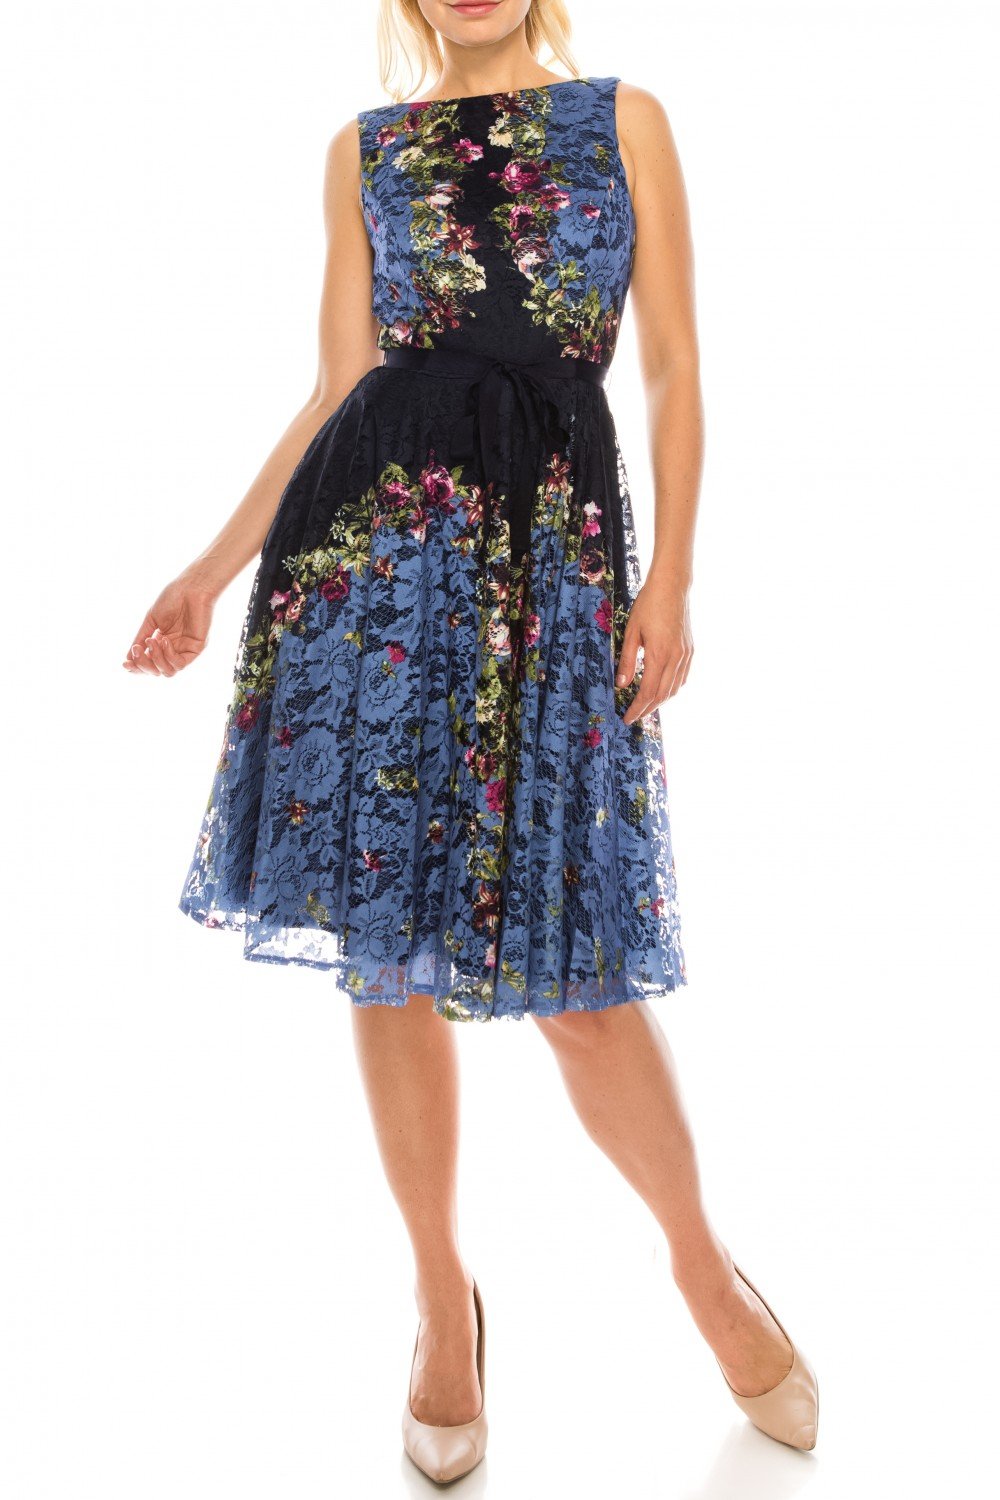 Gabby Skye - 57369MG Sleeveless Floral Print Lace A-Line Dress In Blue and Black